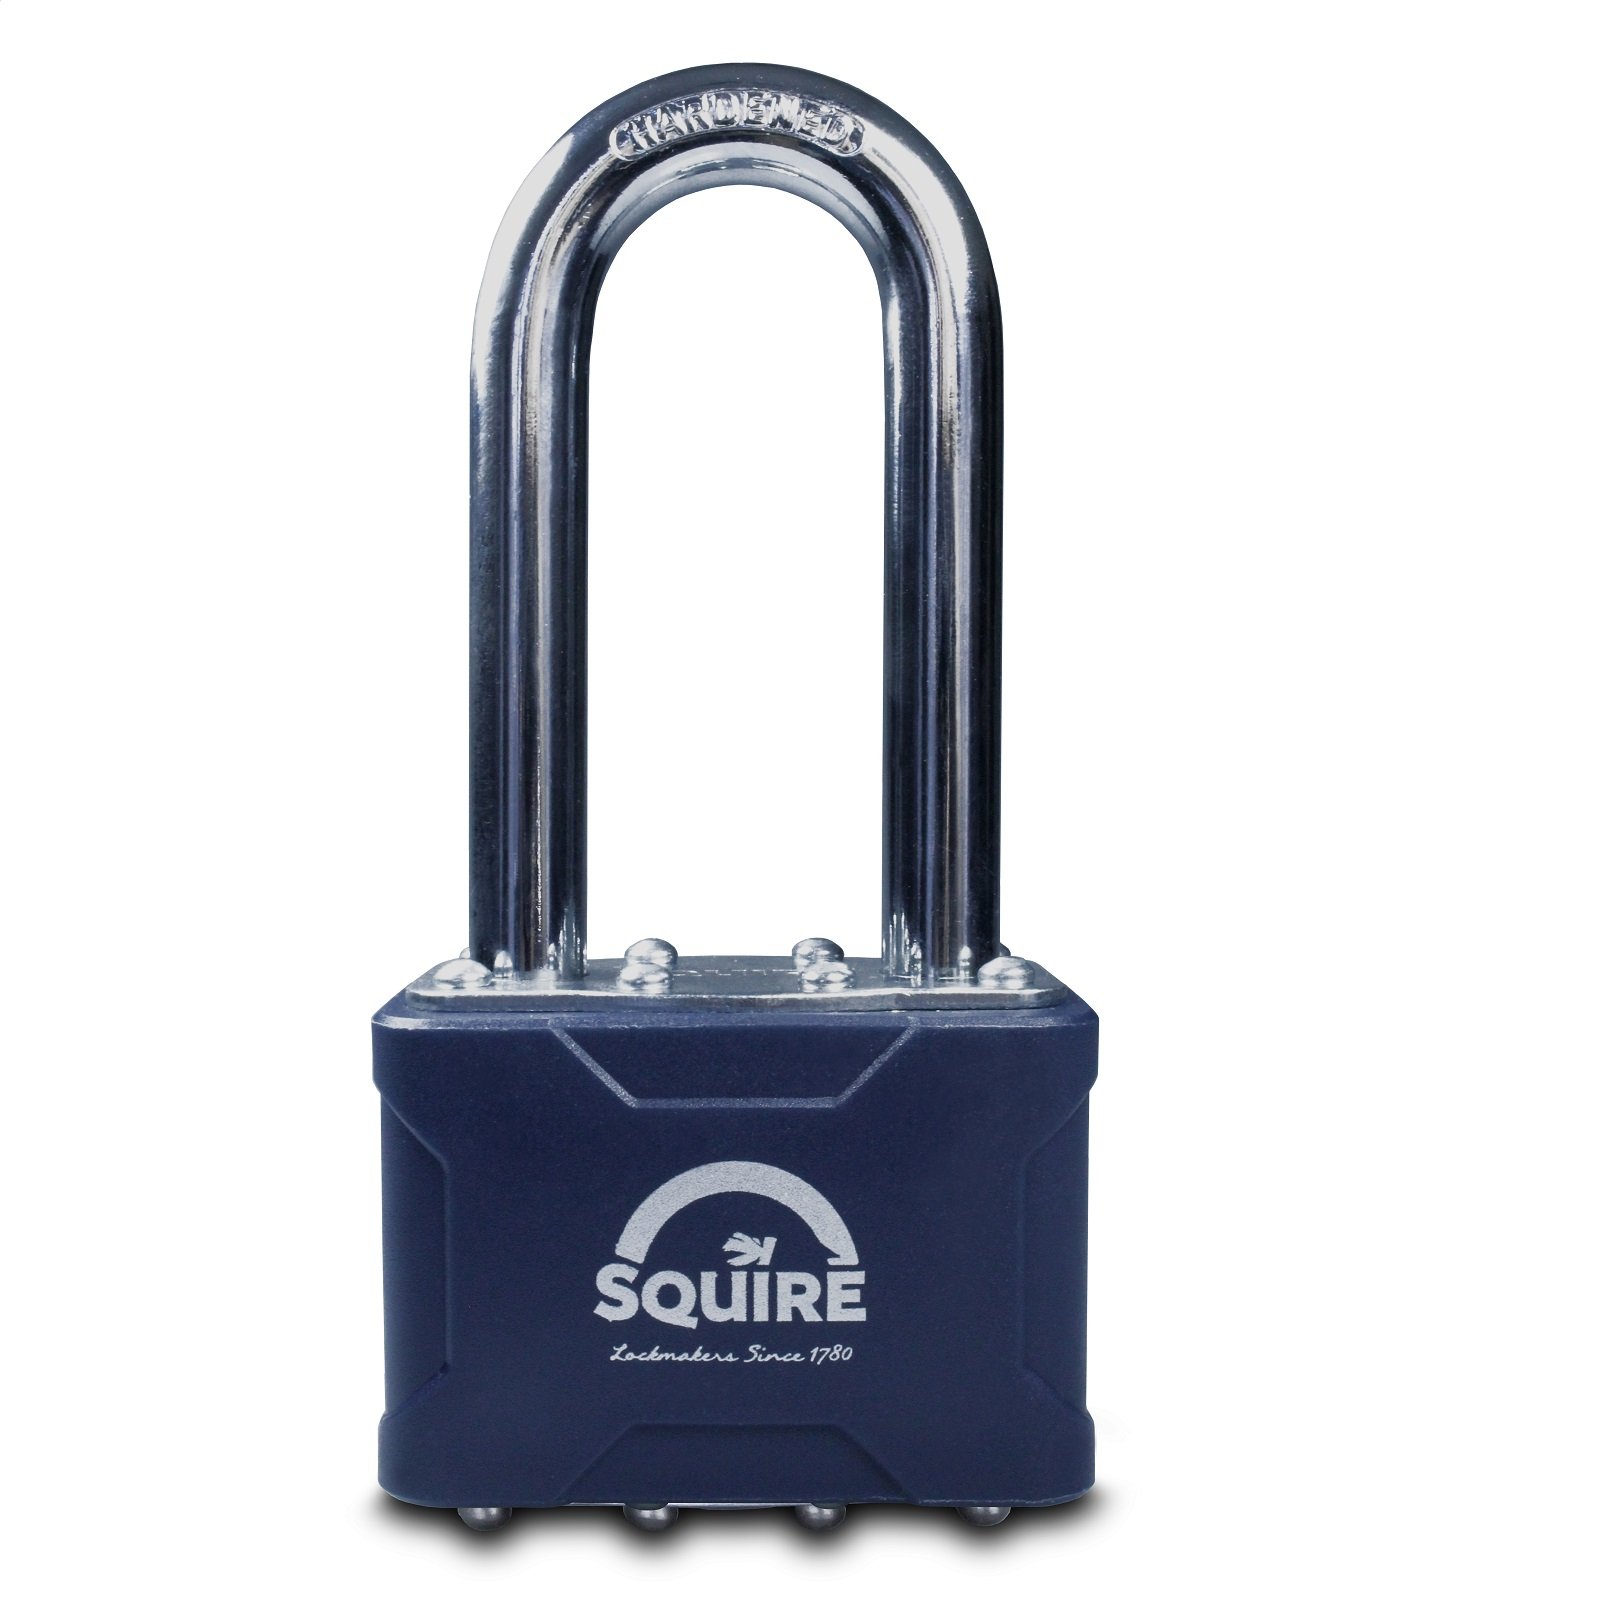 Squire 39/2.5 Stronglock Padlock Long Shackle 50mm